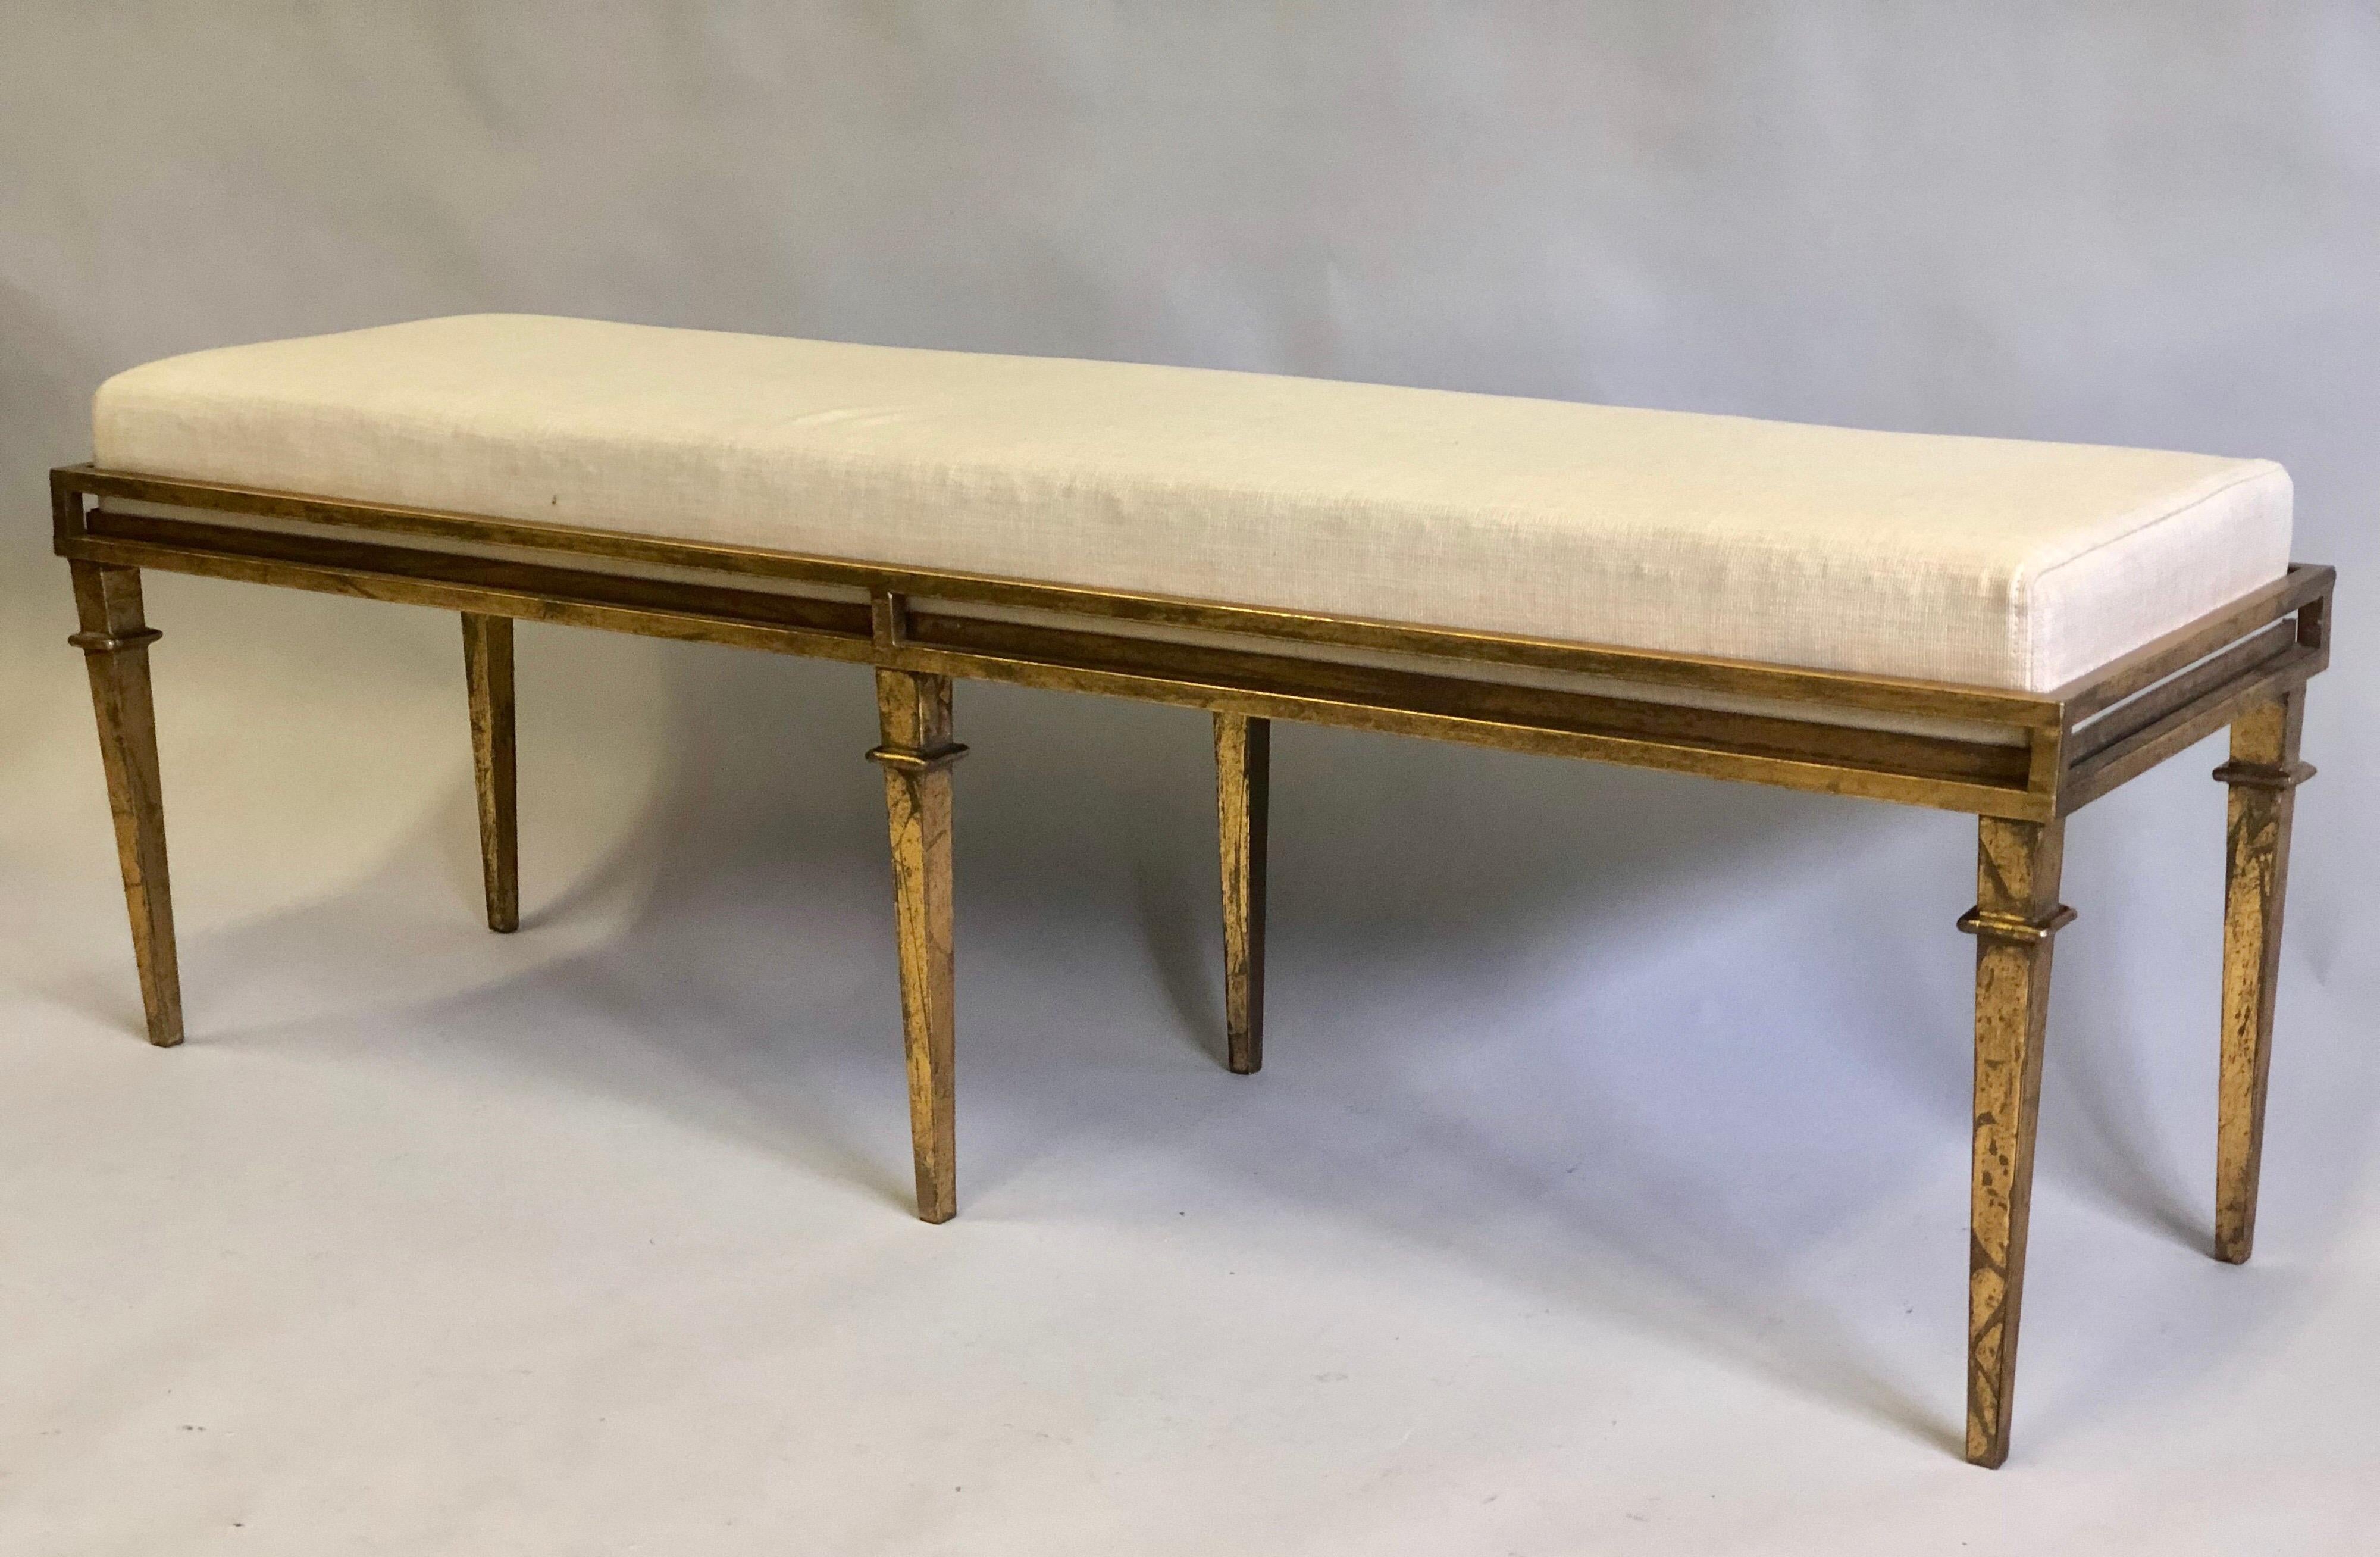 Elegant French Custom Mid-Century Modern Neoclassical style gilt iron bench in the style of Maison Ramsay. The piece is unique in design and construction: a stunning 6-leg gilt iron bench with each leg tapered, and the seat inset into the frame. The